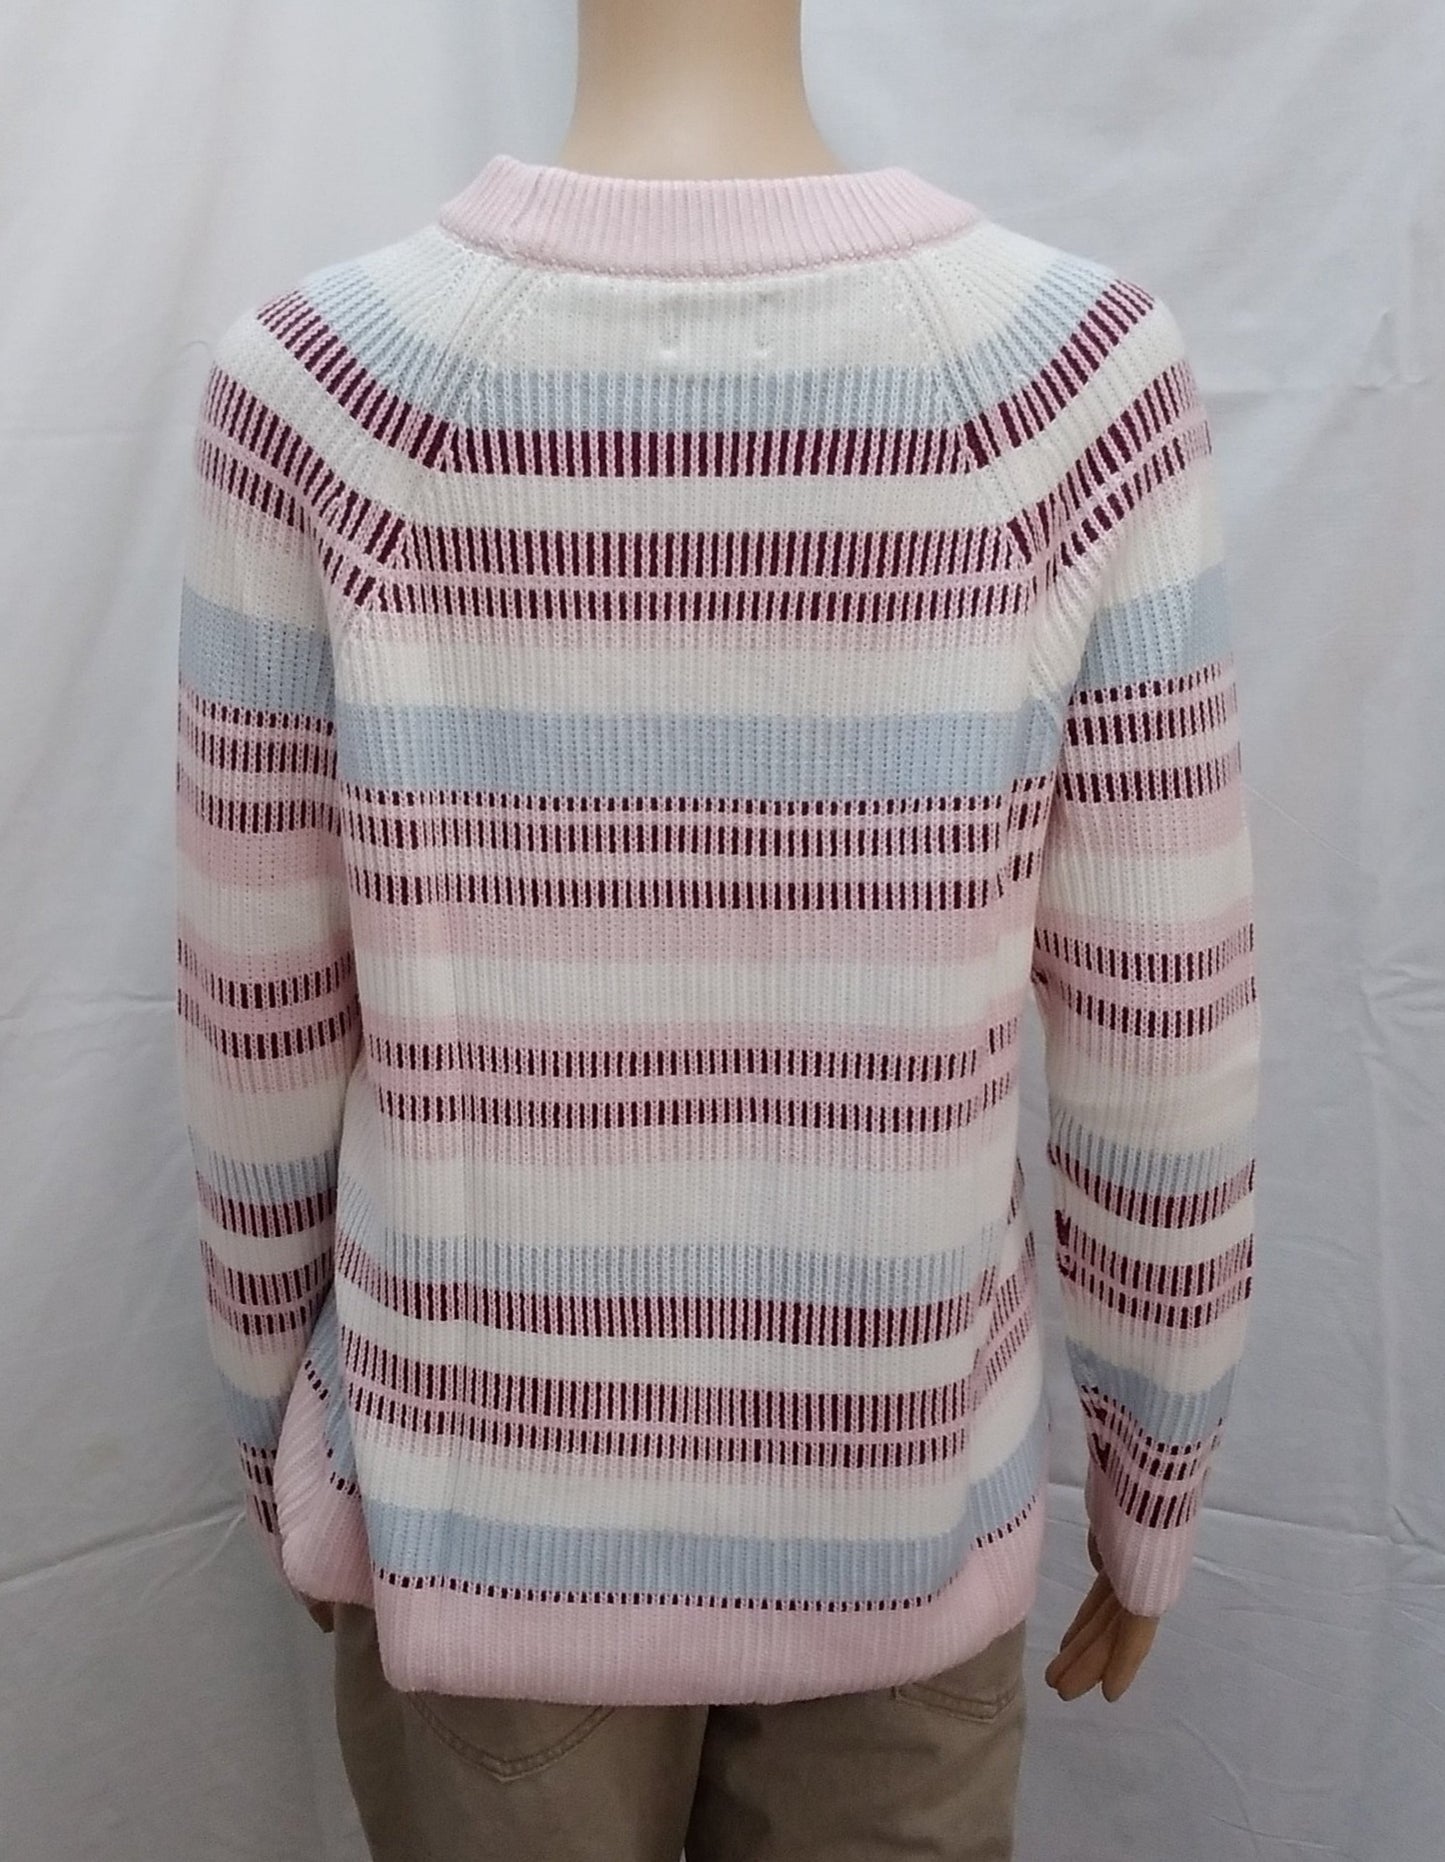 NWT -- Lands' End "Drifter" Crew Neck Sweater -- Size 6-8/S